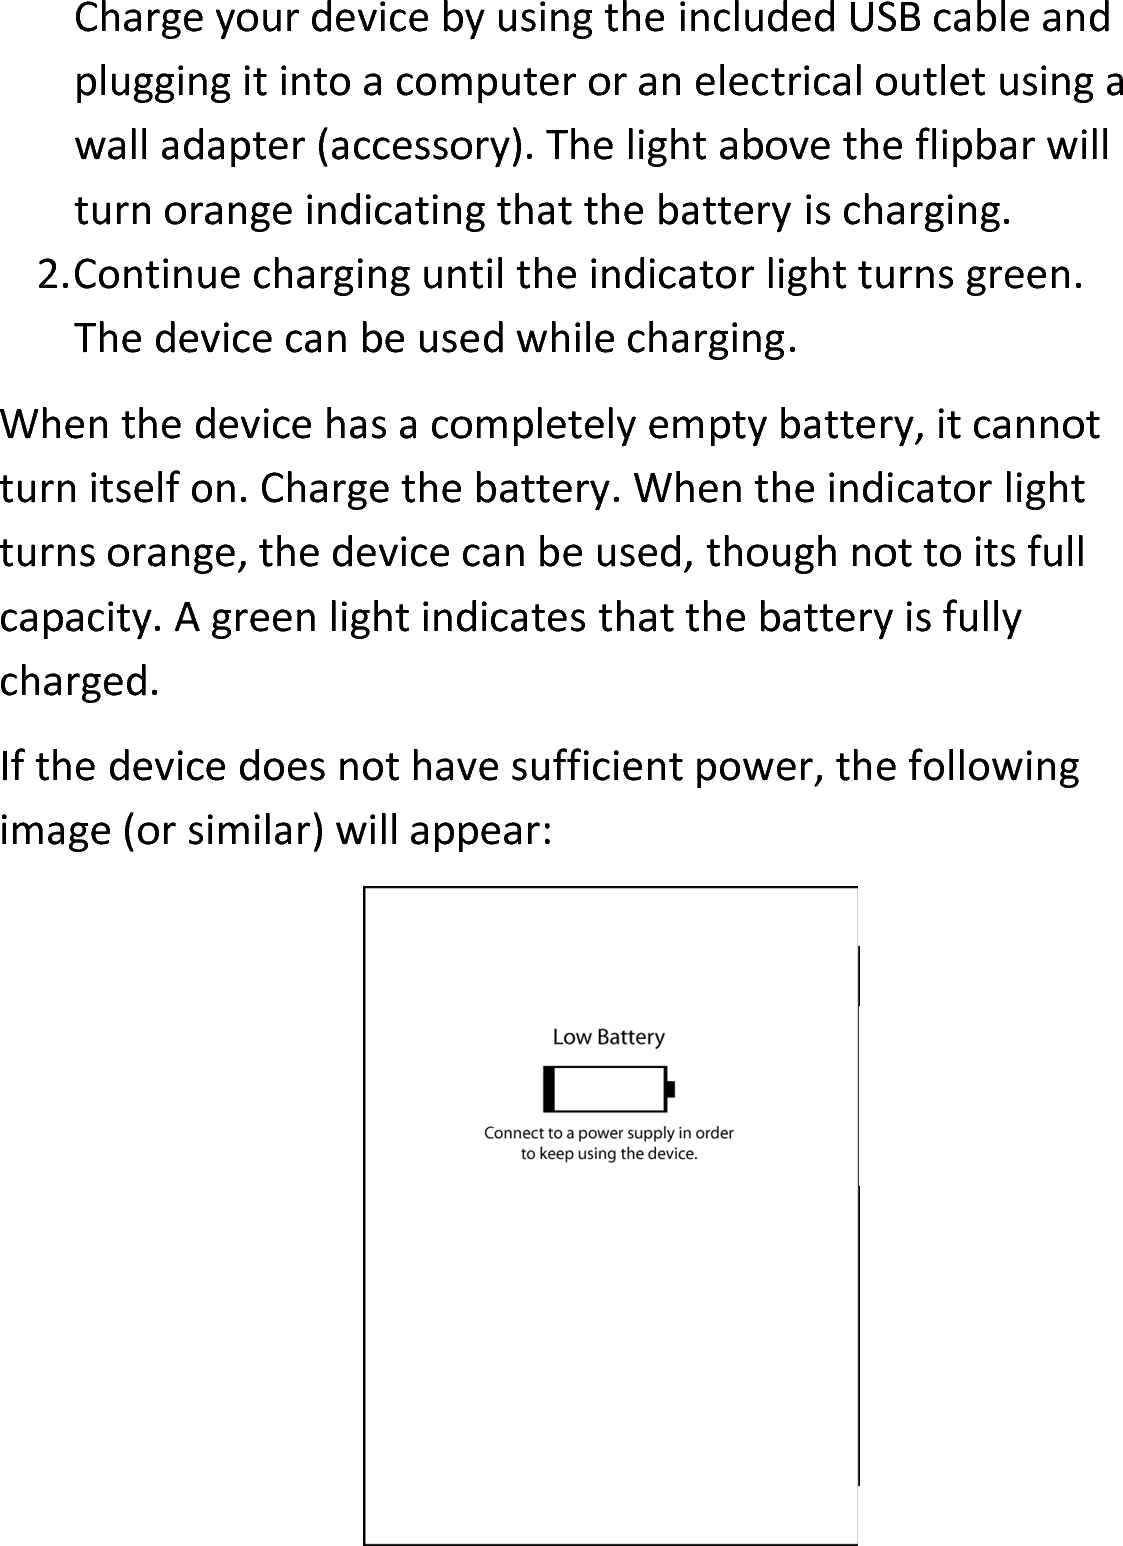 Charge your device by using the included USB cable and plugging it into a computer or an electrical outlet using a wall adapter (accessory). The light above the flipbar will turn orange indicating that the battery is charging. 2.Continue charging until the indicator light turns green. The device can be used while charging.When the device has a completely empty battery, it cannot turn itself on. Charge the battery. When the indicator light turns orange, the device can be used, though not to its full capacity. A green light indicates that the battery is fully charged.If the device does not have sufficient power, the following image (or similar) will appear: 